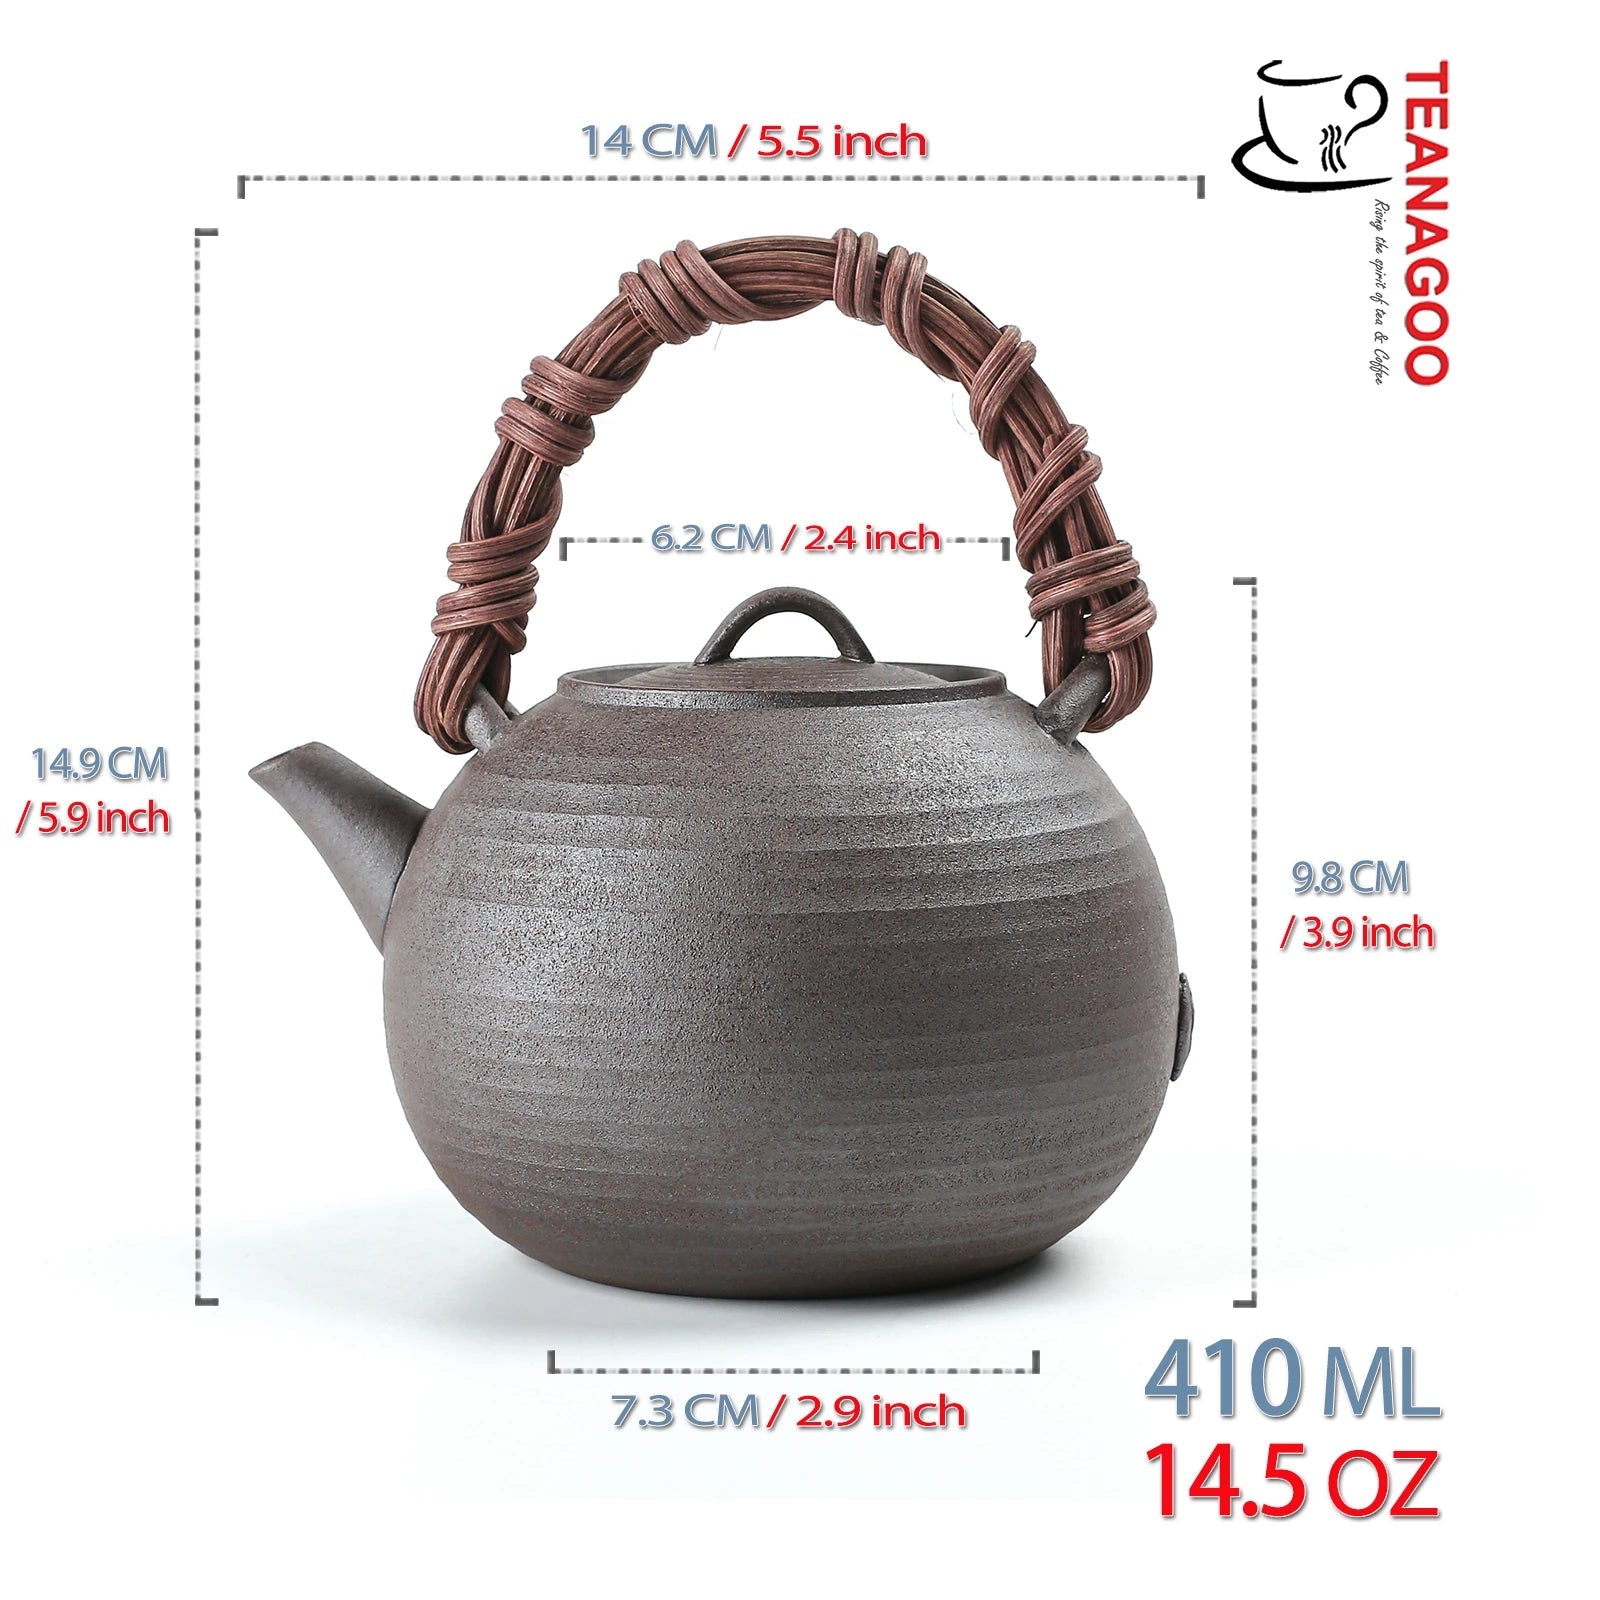 Handcrafted Pottery Clay Teapot 410ml Ceramic Tea Accessory